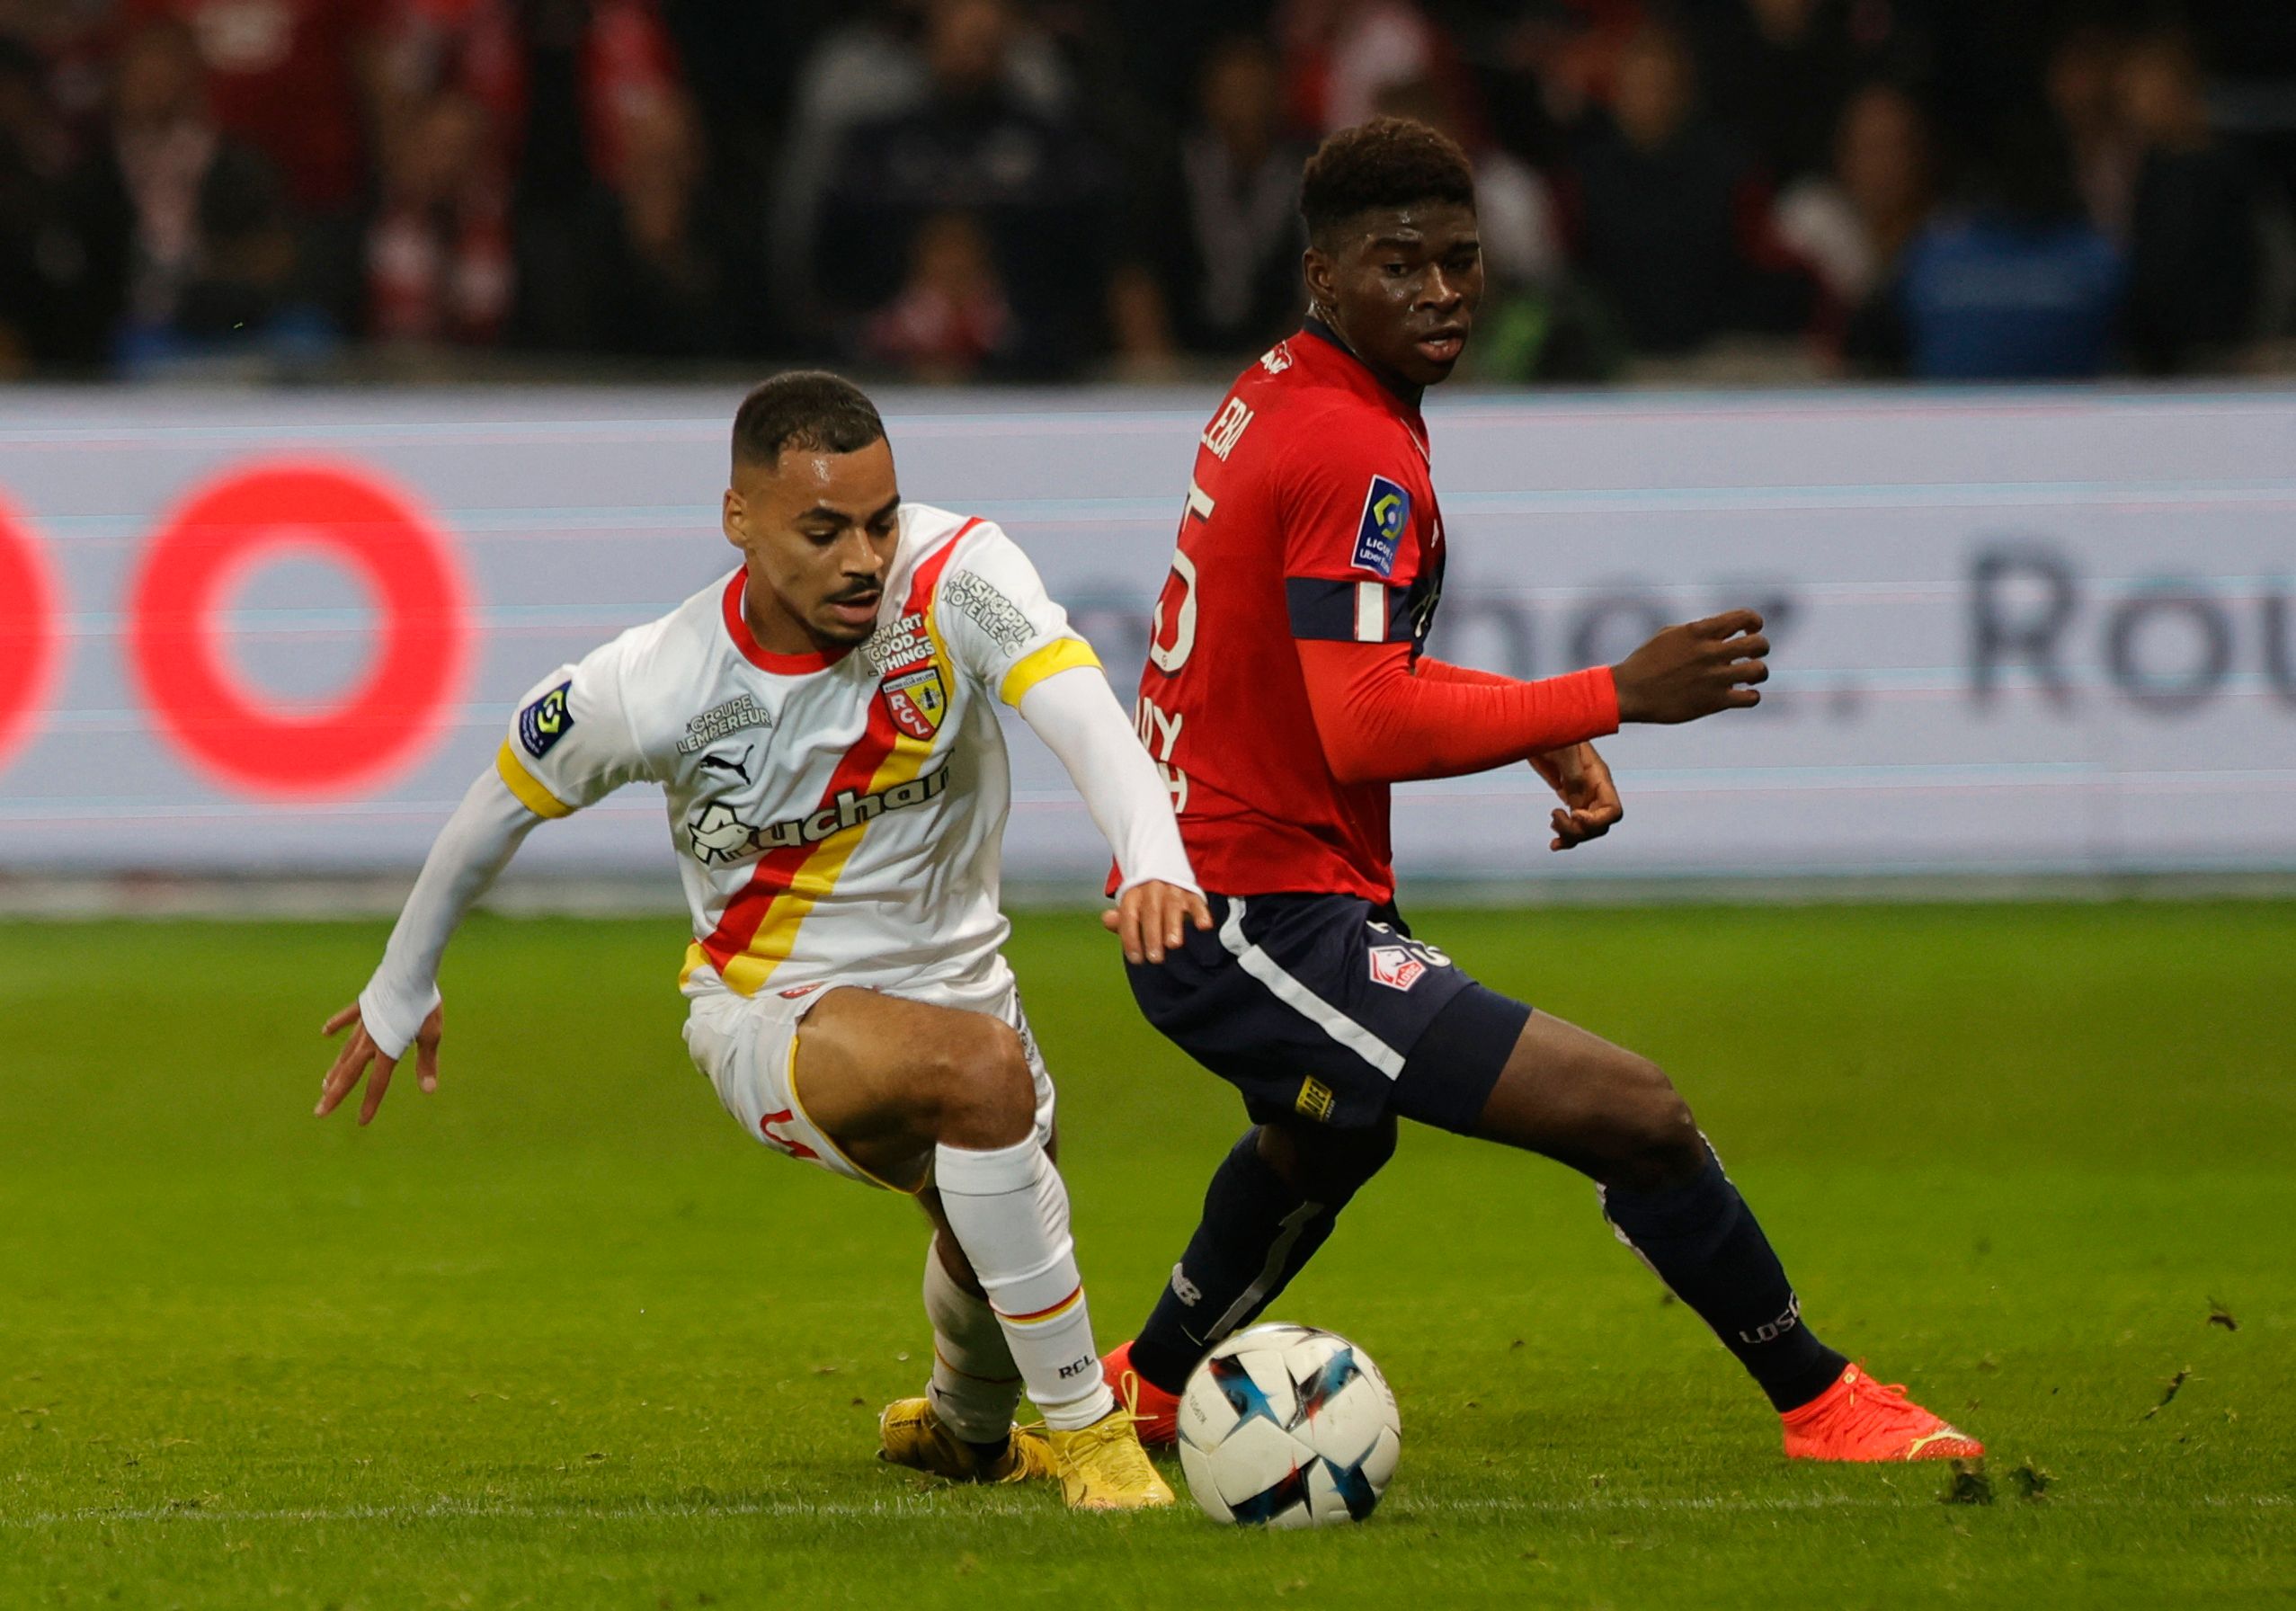 Soccer Football - Ligue 1 - Lille v RC Lens - Stade Pierre-Mauroy, Villeneuve-d'Ascq, France - October 9, 2022 Lille's Carlos Noom Quomah Baleba in action with RC Lens' Alexis Claude Maurice REUTERS/Pascal Rossignol